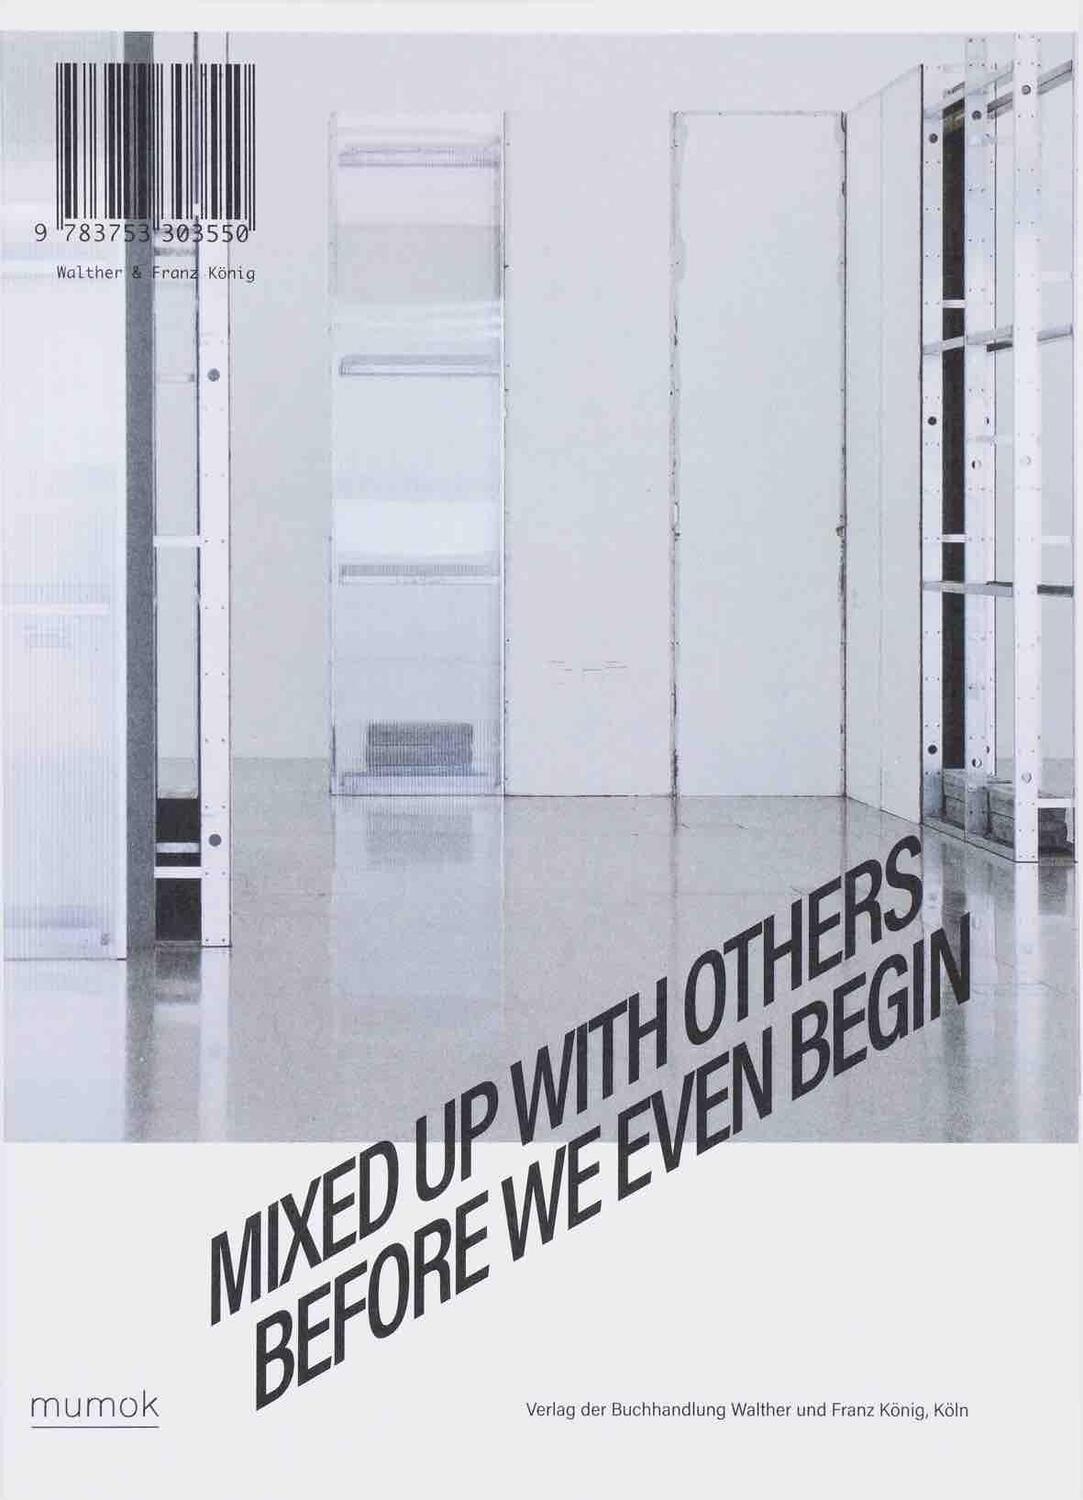 Cover: 9783753303550 | Mixed Up With Others Before We Even Begin | mumok, Wien | Thalmair